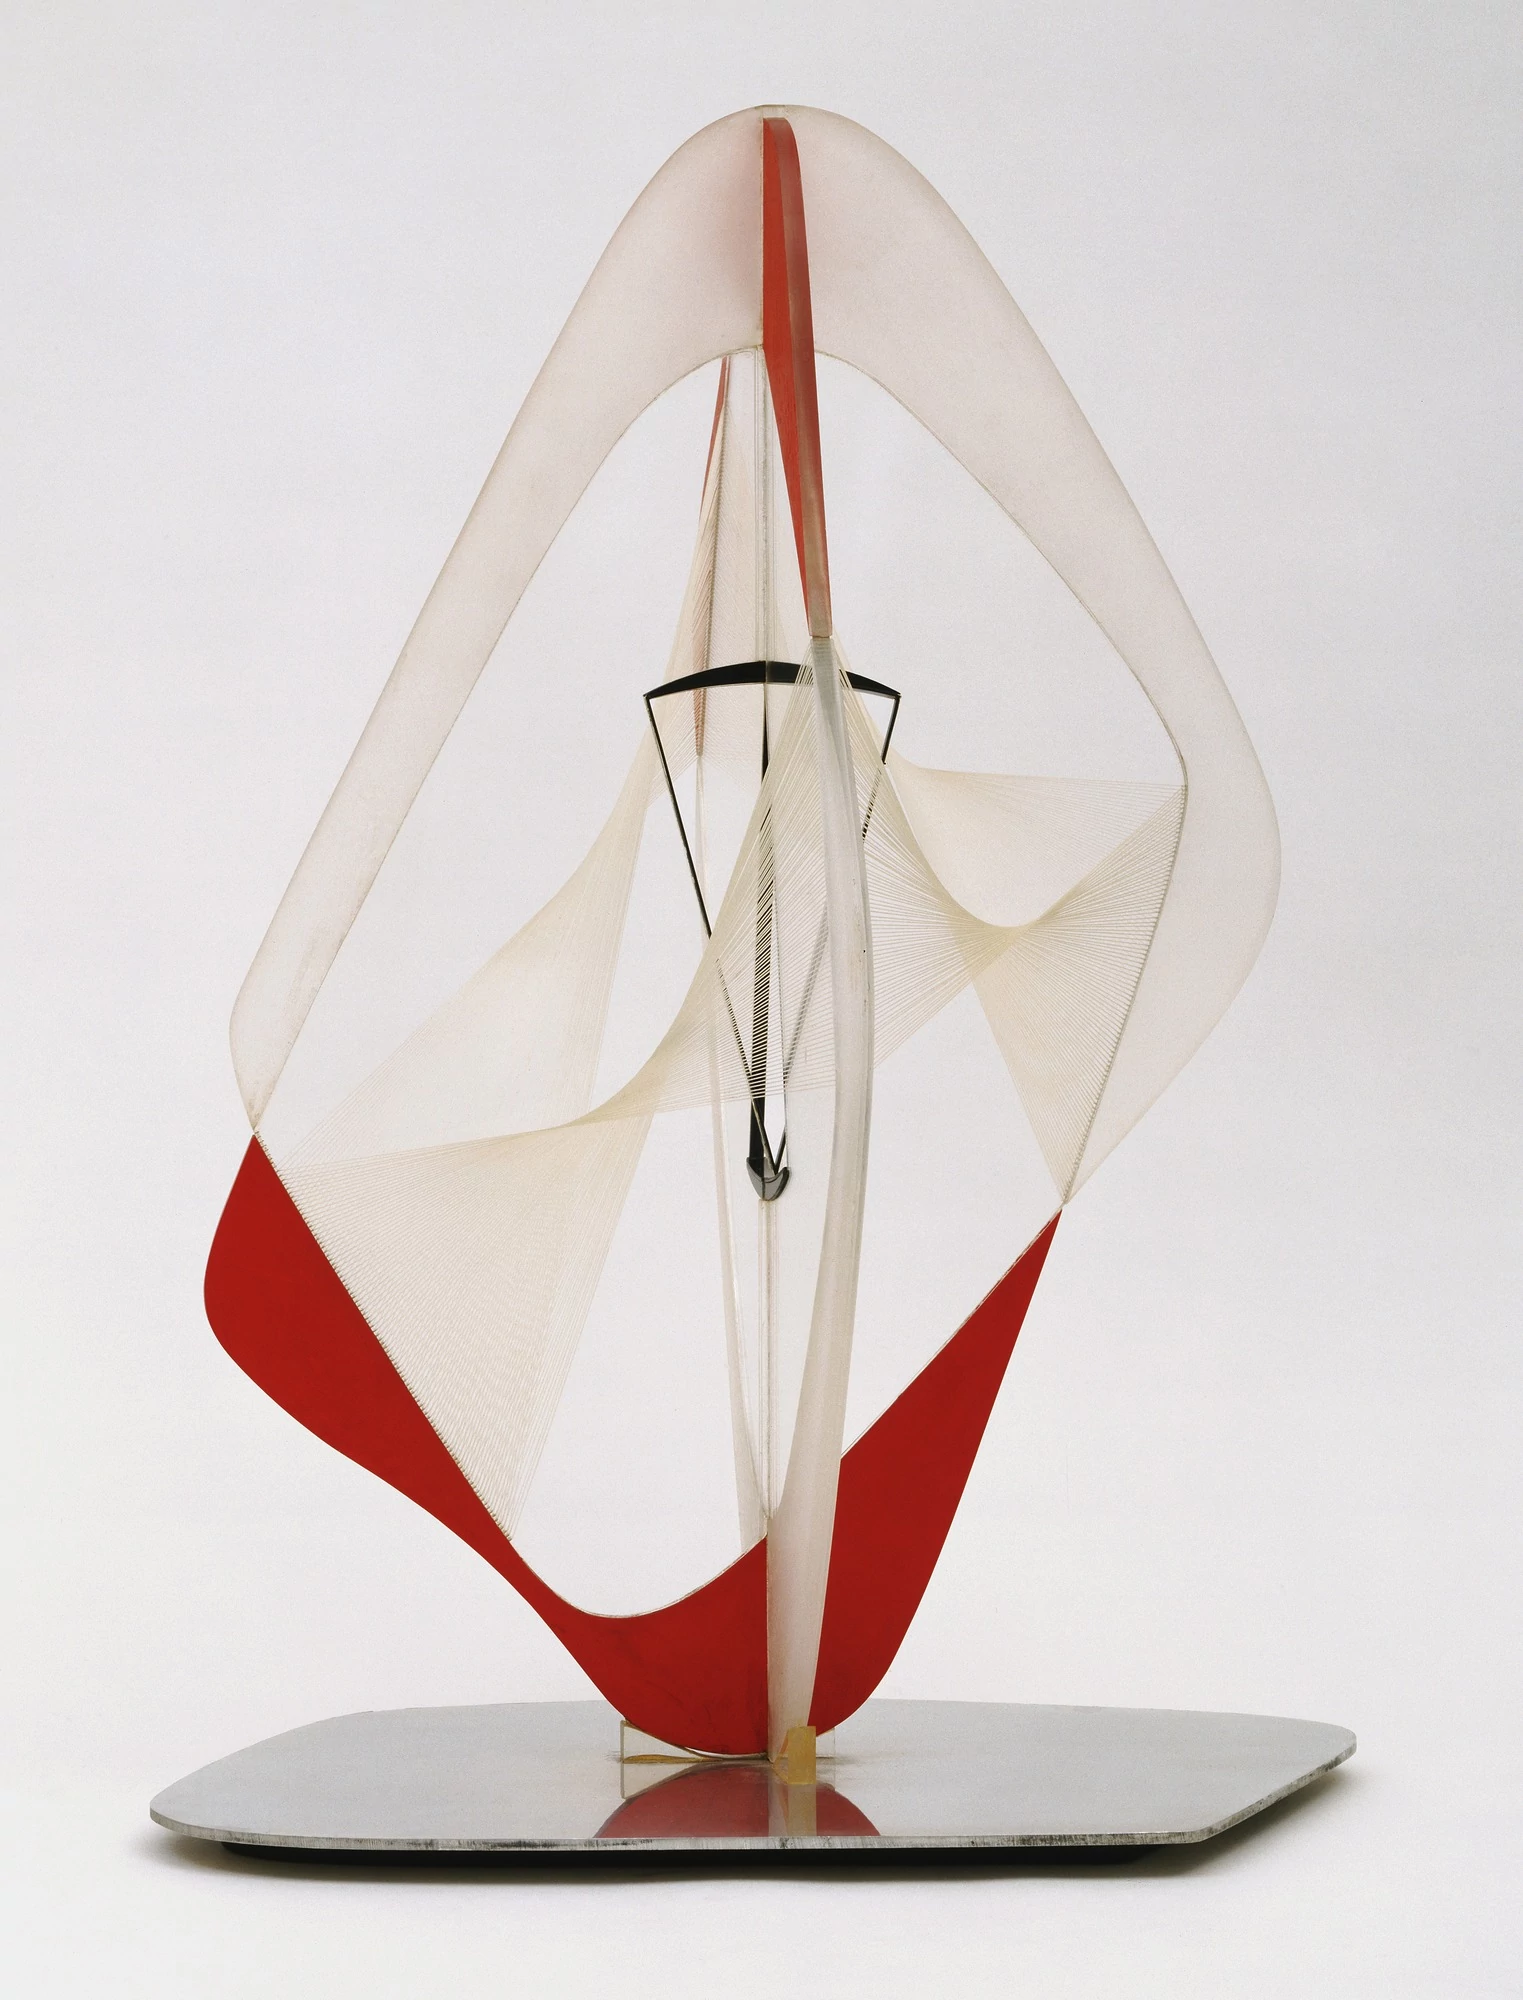 Linear Construction in Space no. 3, with Red, Naum Gabo